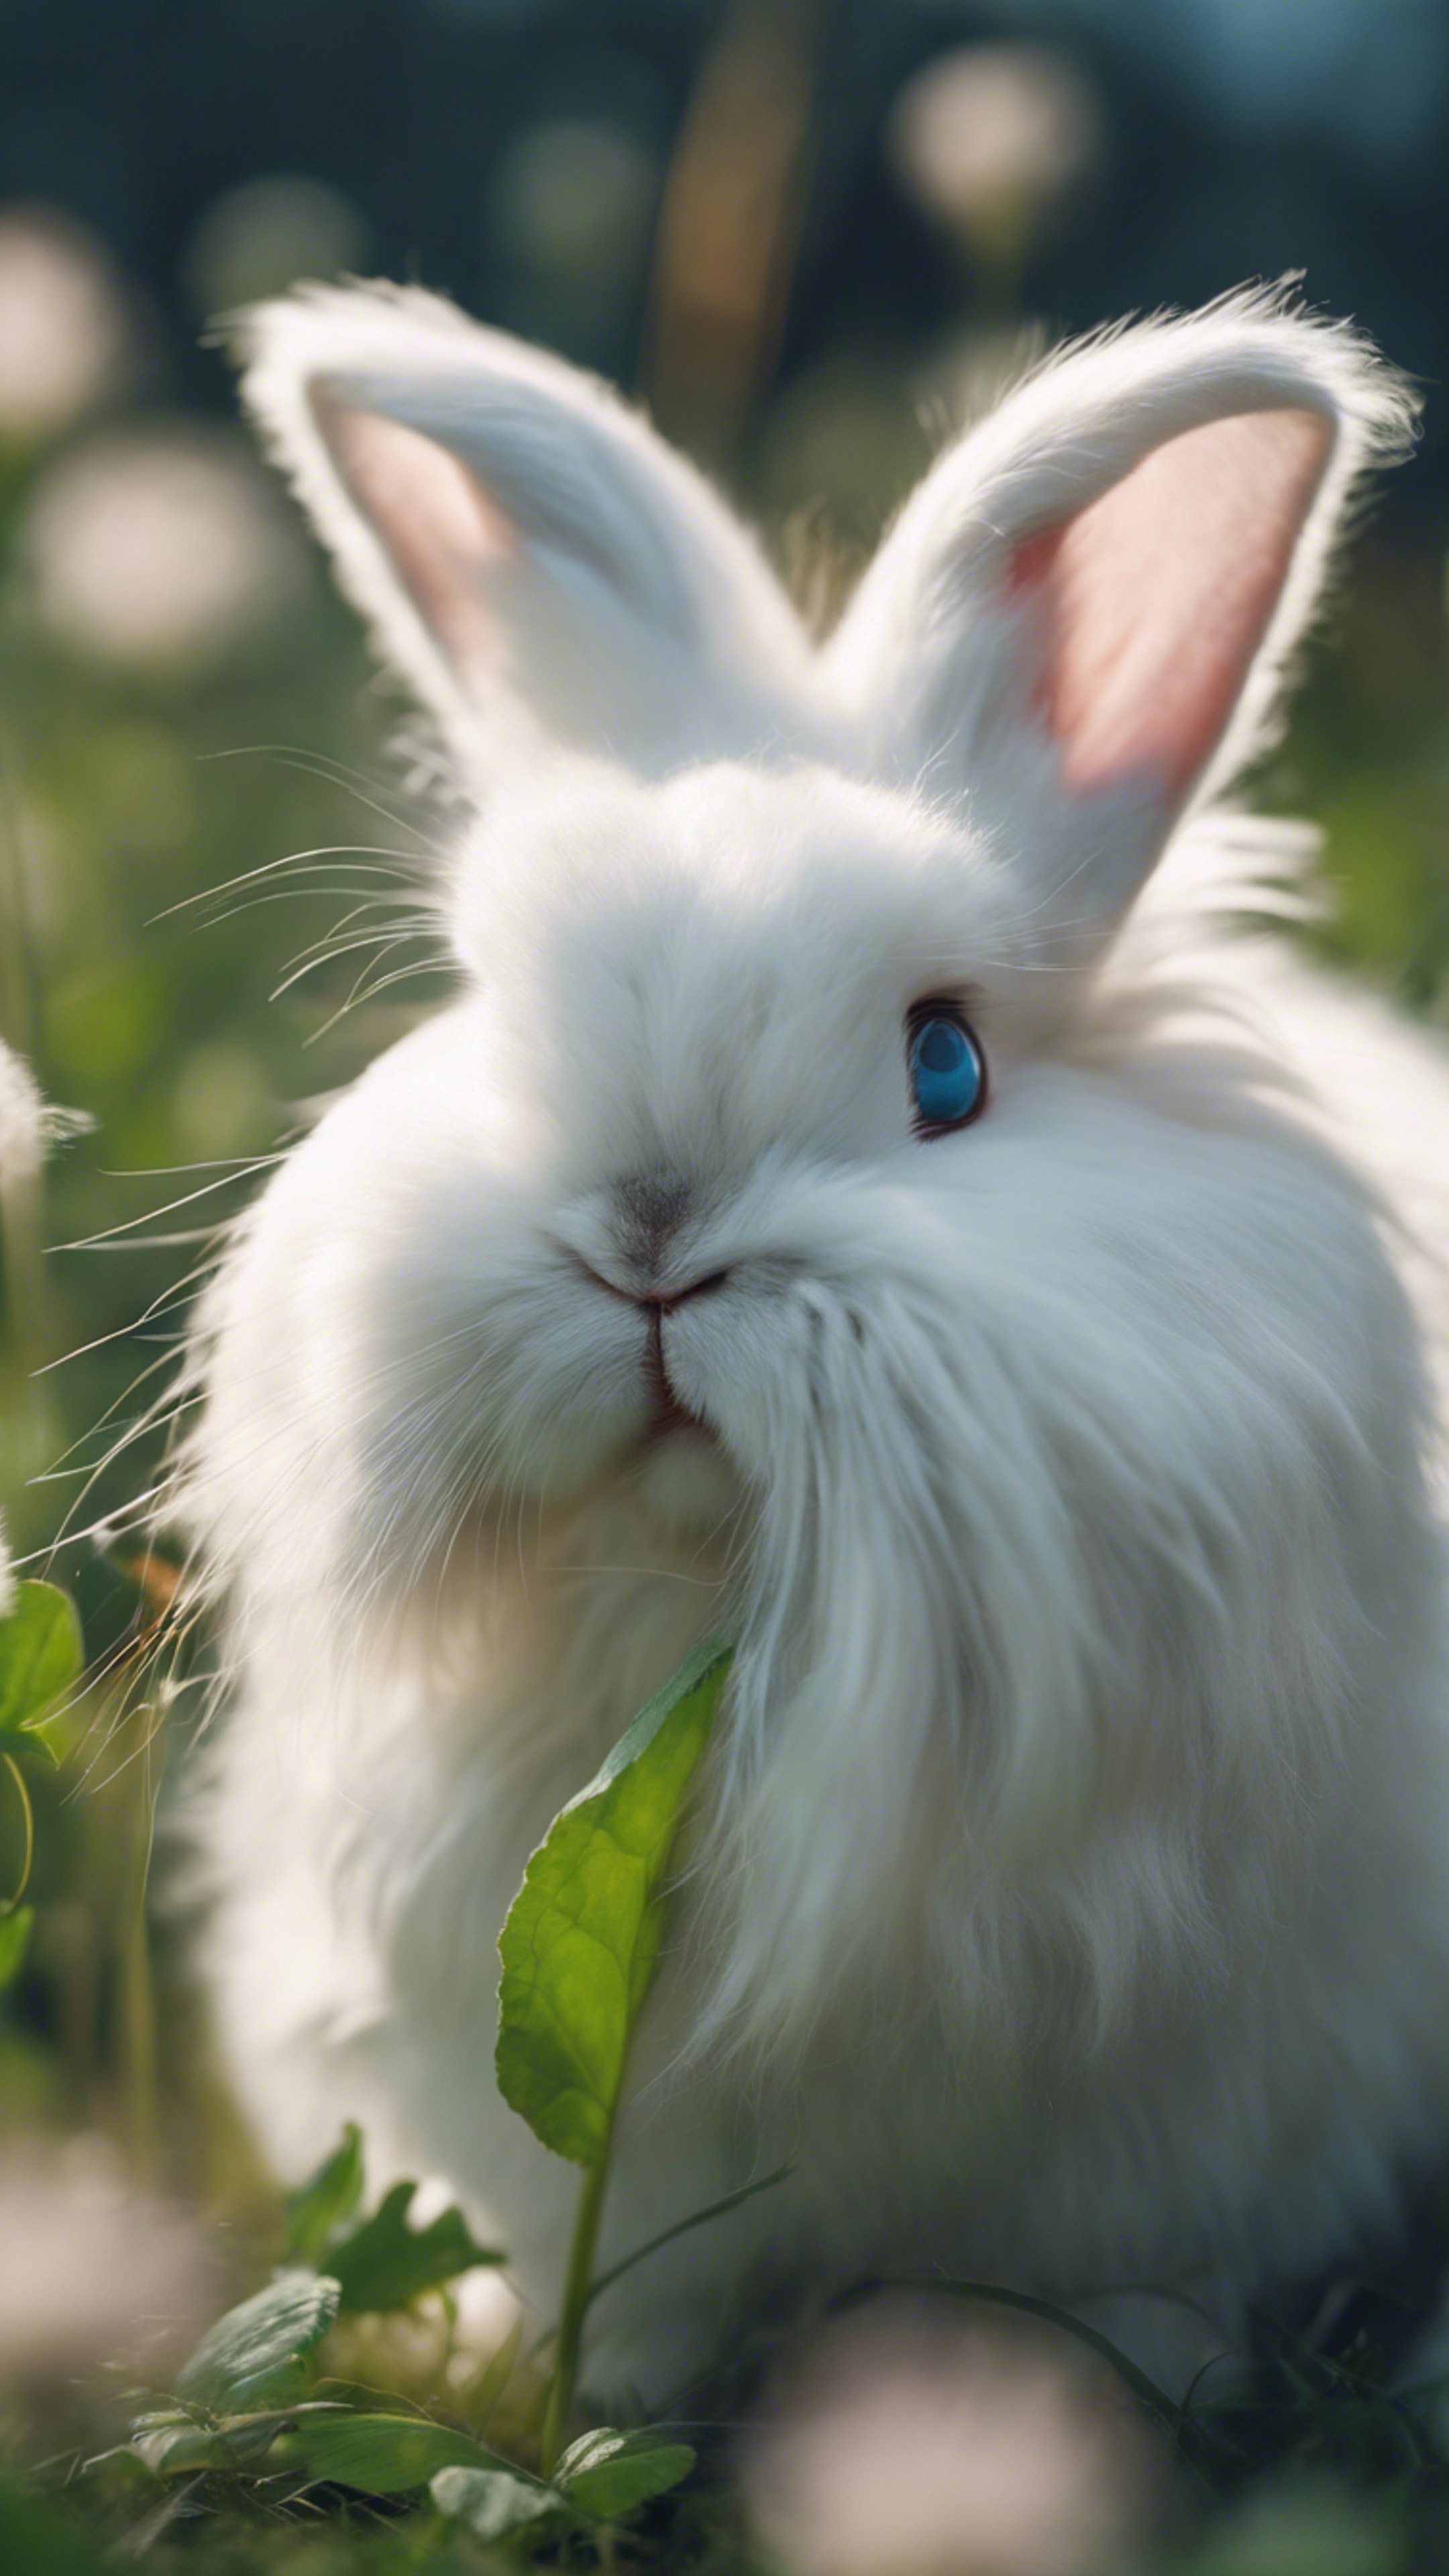 A fluffy angora rabbit with big blue eyes, nestled snugly in a patch of clover. Tapeta[a1edfdea4e4b4864b66c]